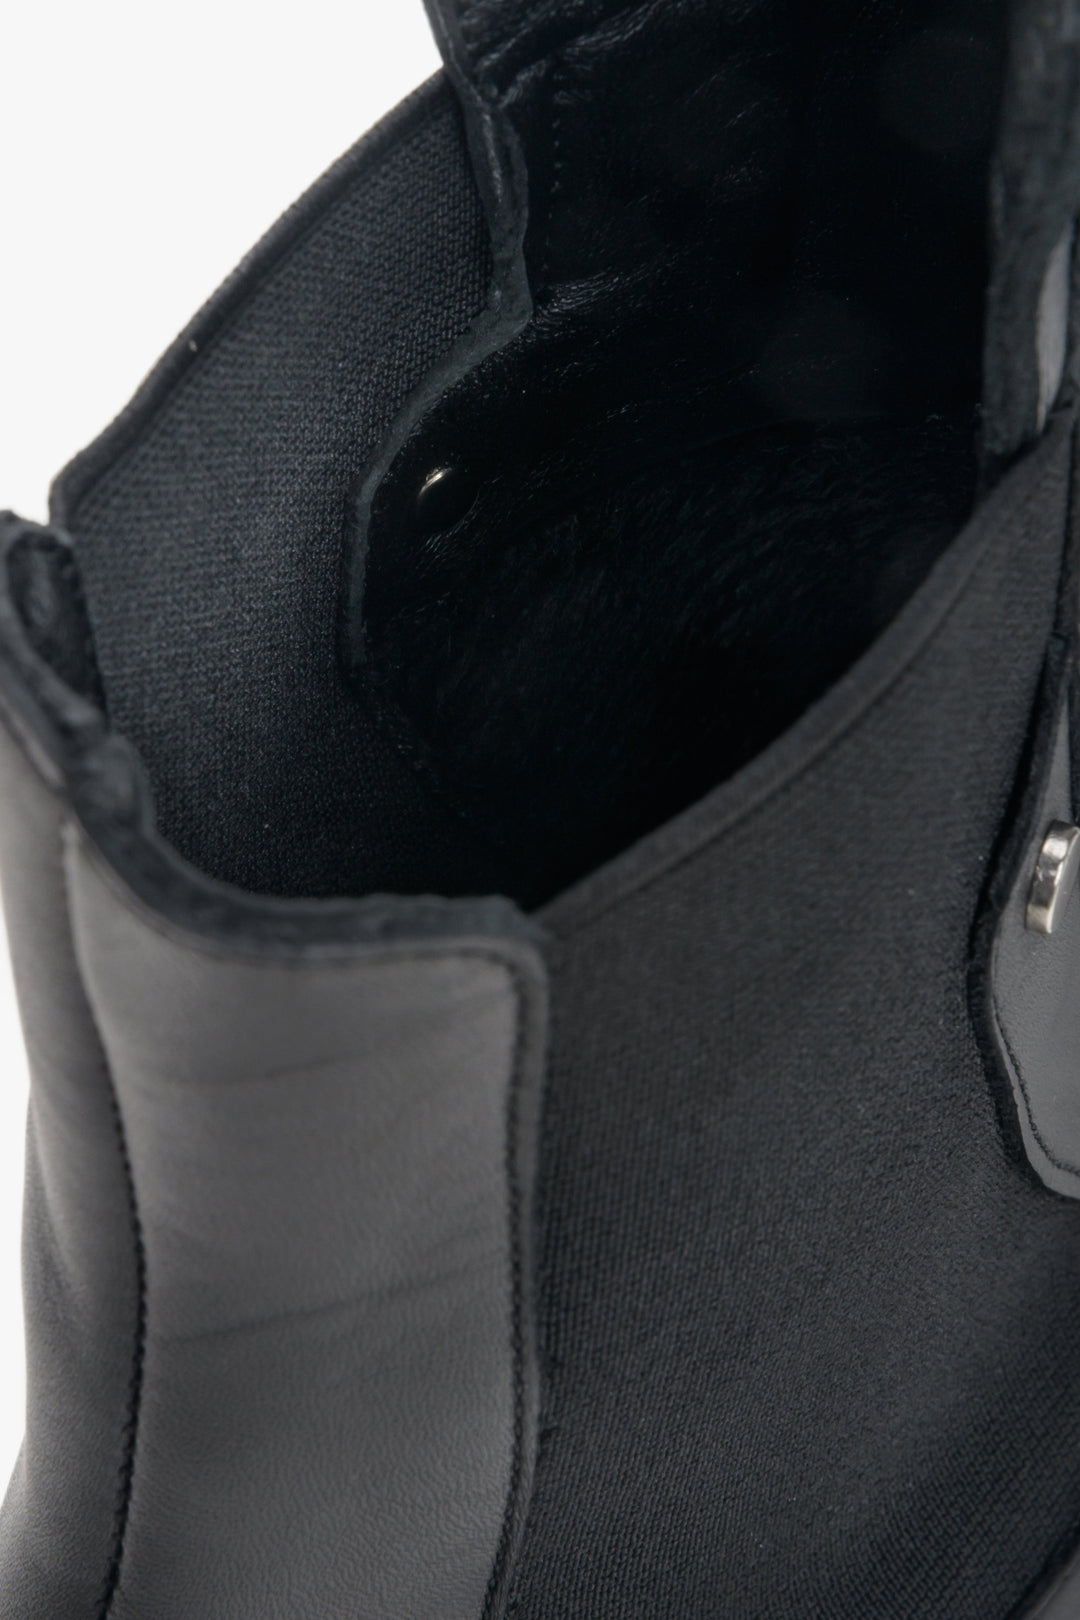 Women's leather and textile ankle boots in black - close-up on details.